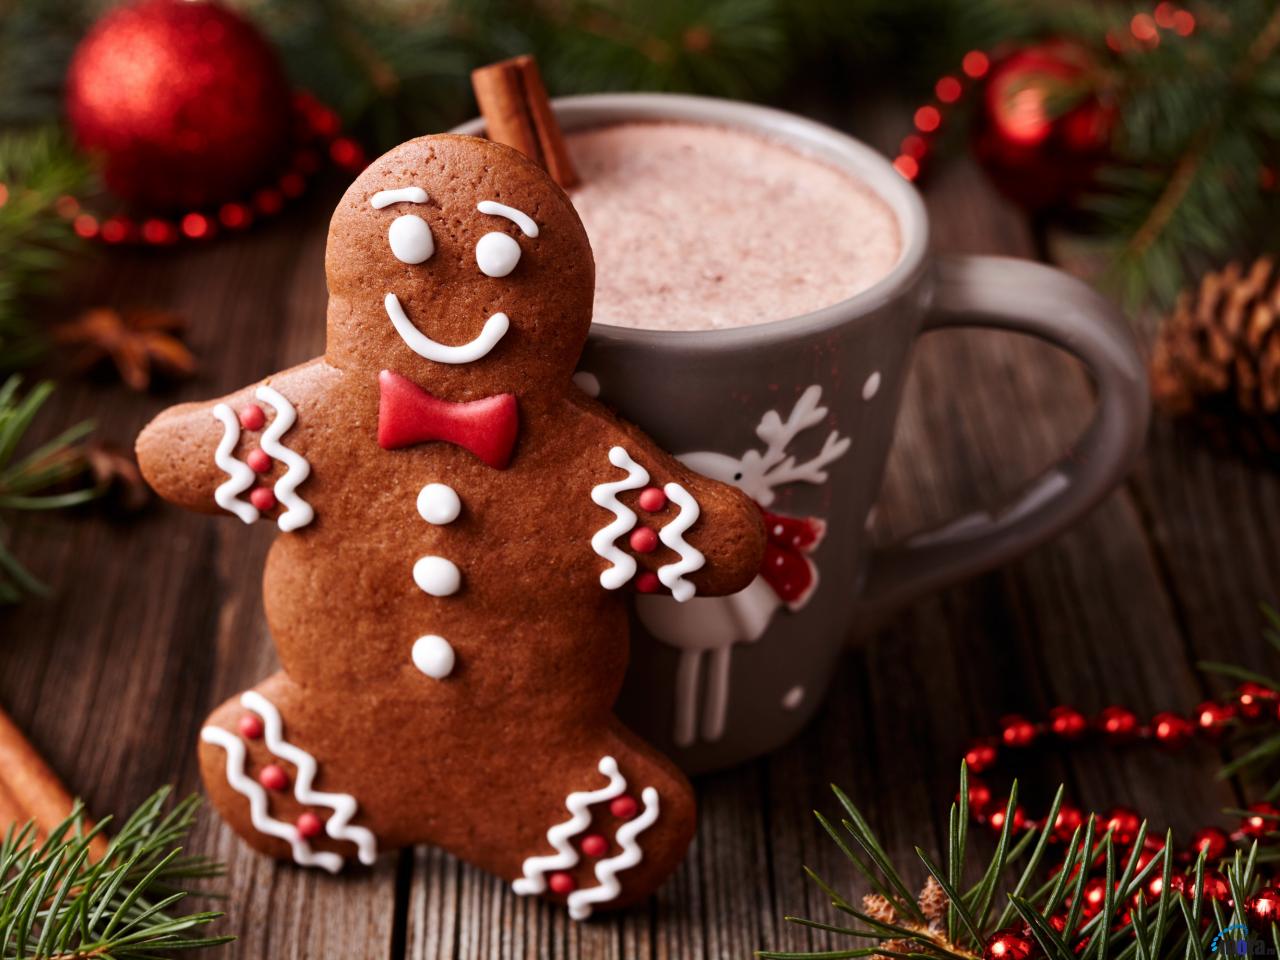 36300 Gingerbread Man Stock Photos Pictures  RoyaltyFree Images   iStock  Gingerbread man vector Gingerbread man cookie Sad gingerbread man